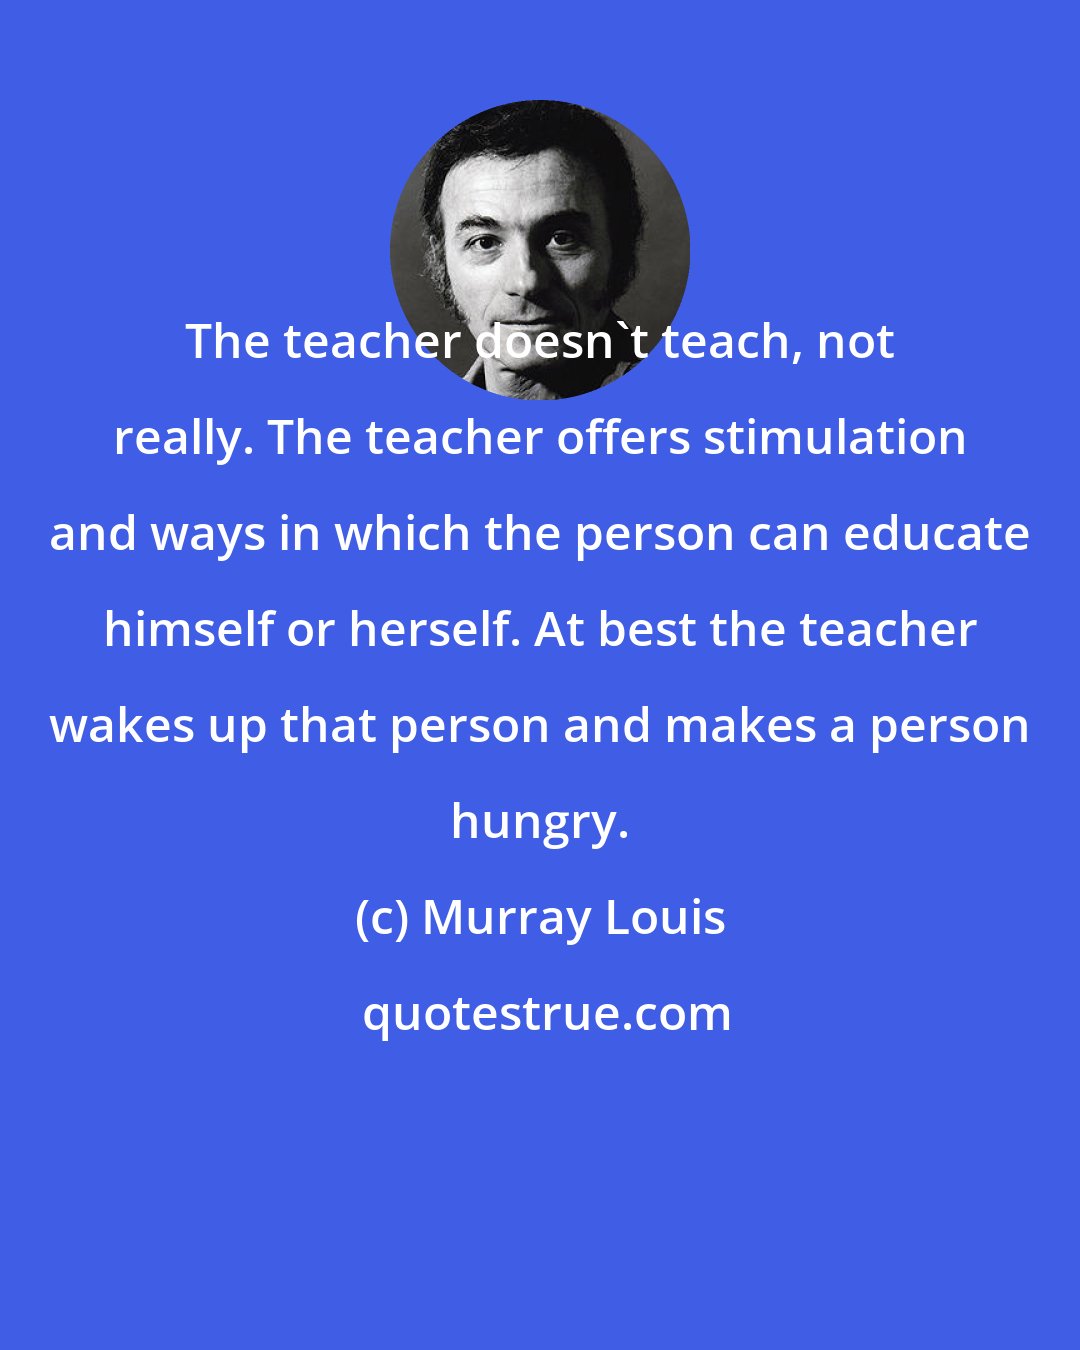 Murray Louis: The teacher doesn't teach, not really. The teacher offers stimulation and ways in which the person can educate himself or herself. At best the teacher wakes up that person and makes a person hungry.